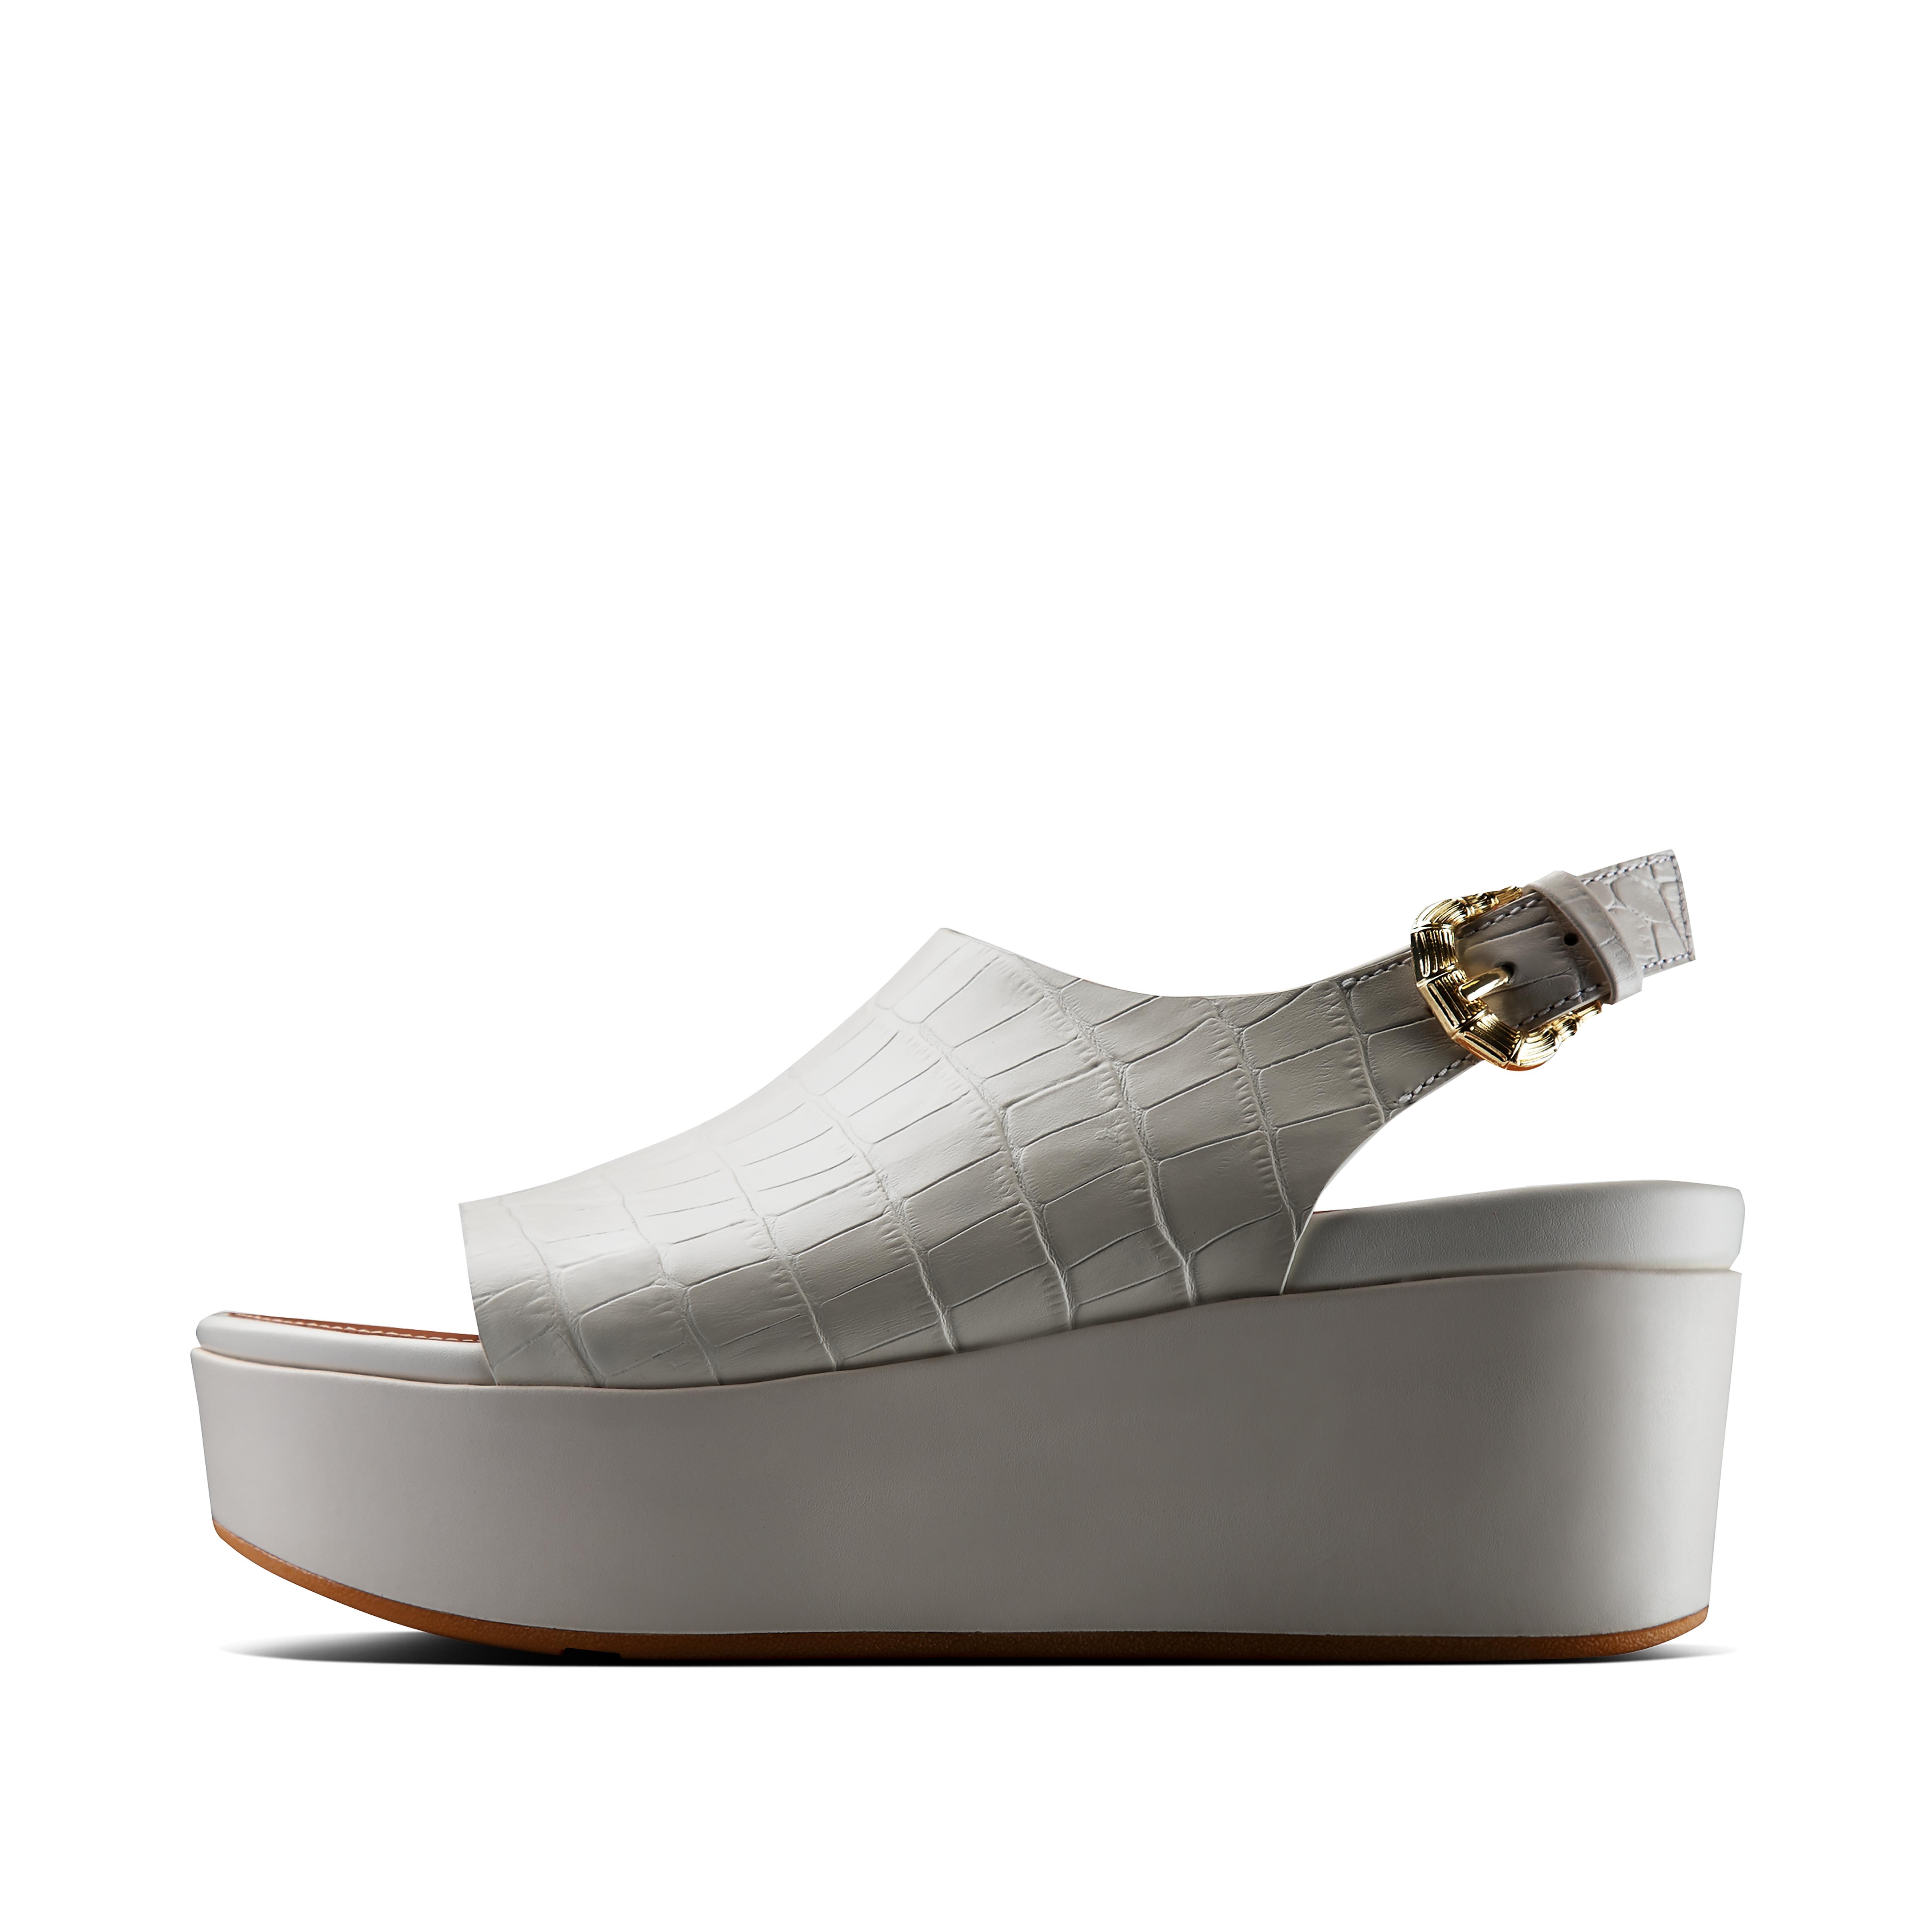 fitflop eloise sandals